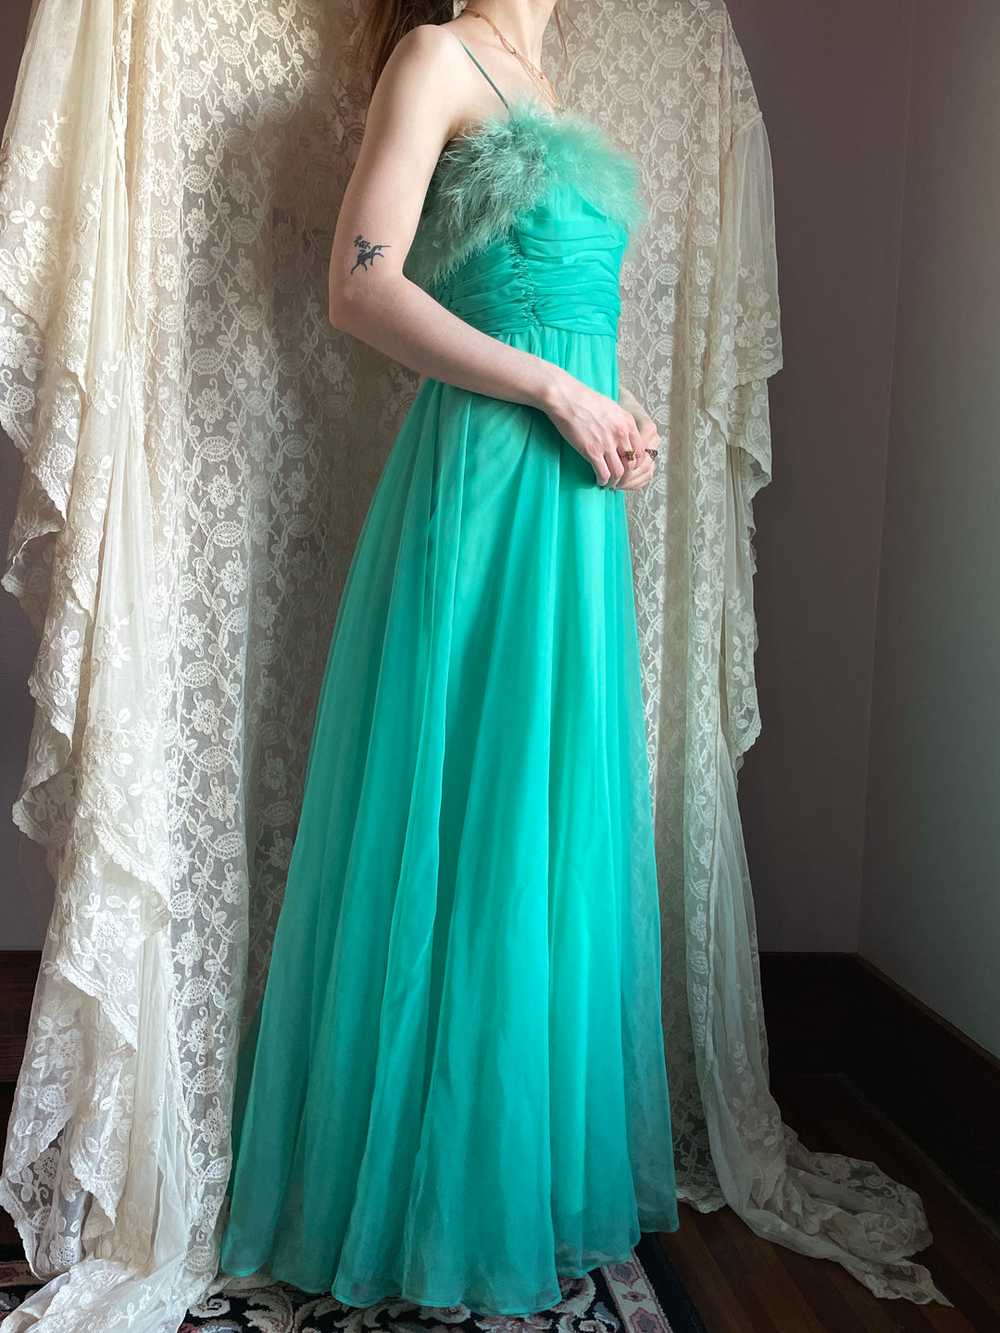 1960s Marabou Feather Green Chiffon Gown Dress - image 11